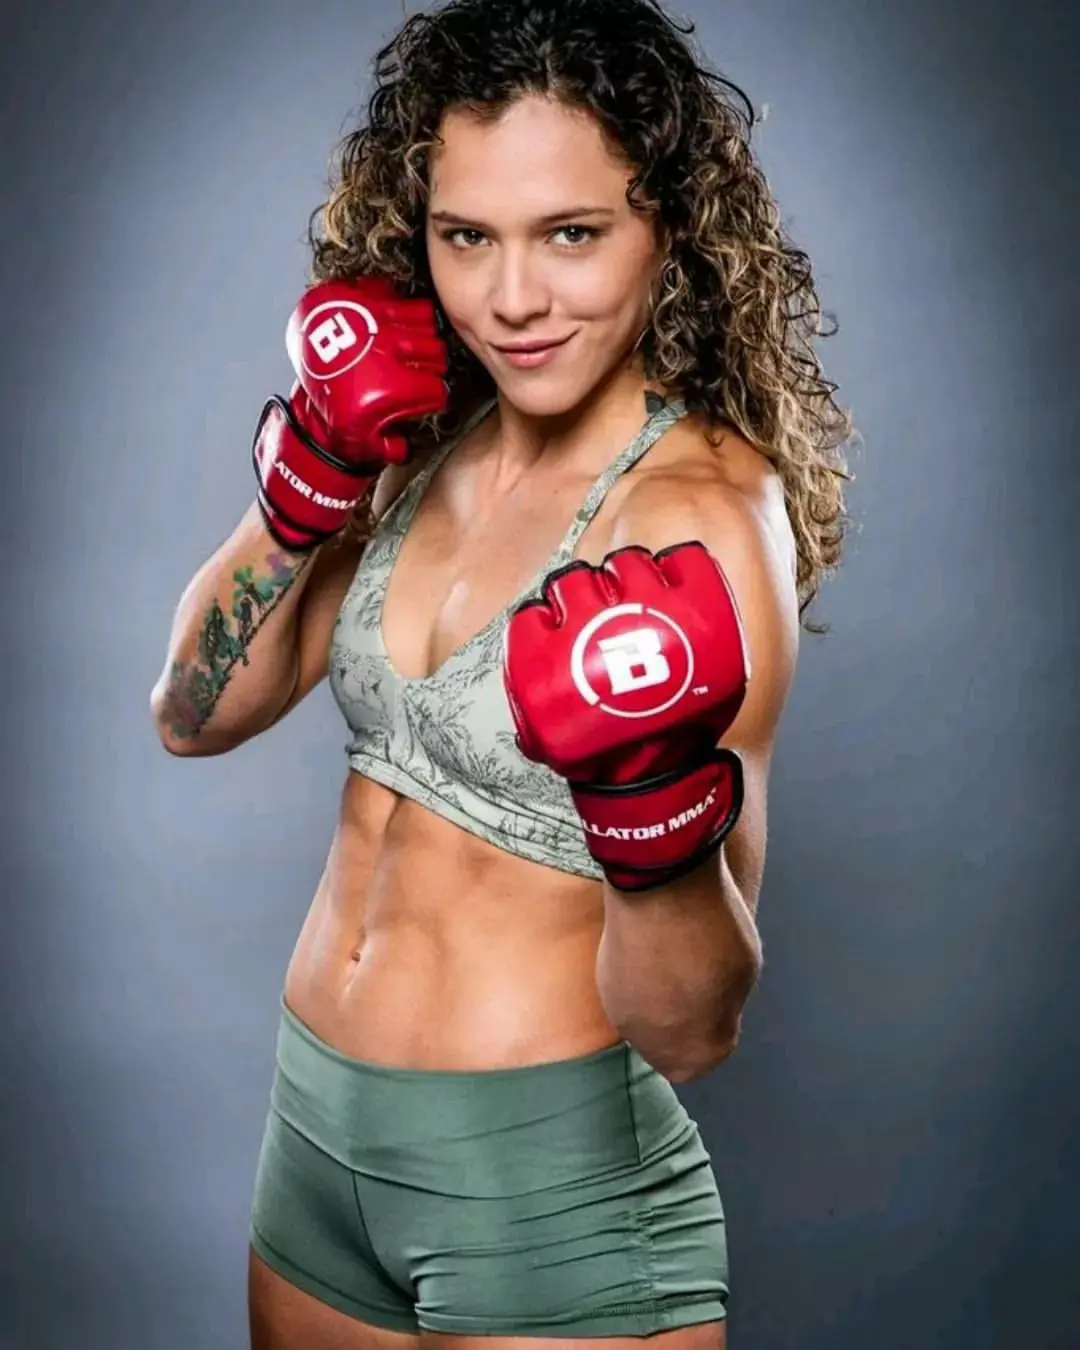 Alejandra Lara is a female MMA fighter from Colombia who also performs an aerial dance.